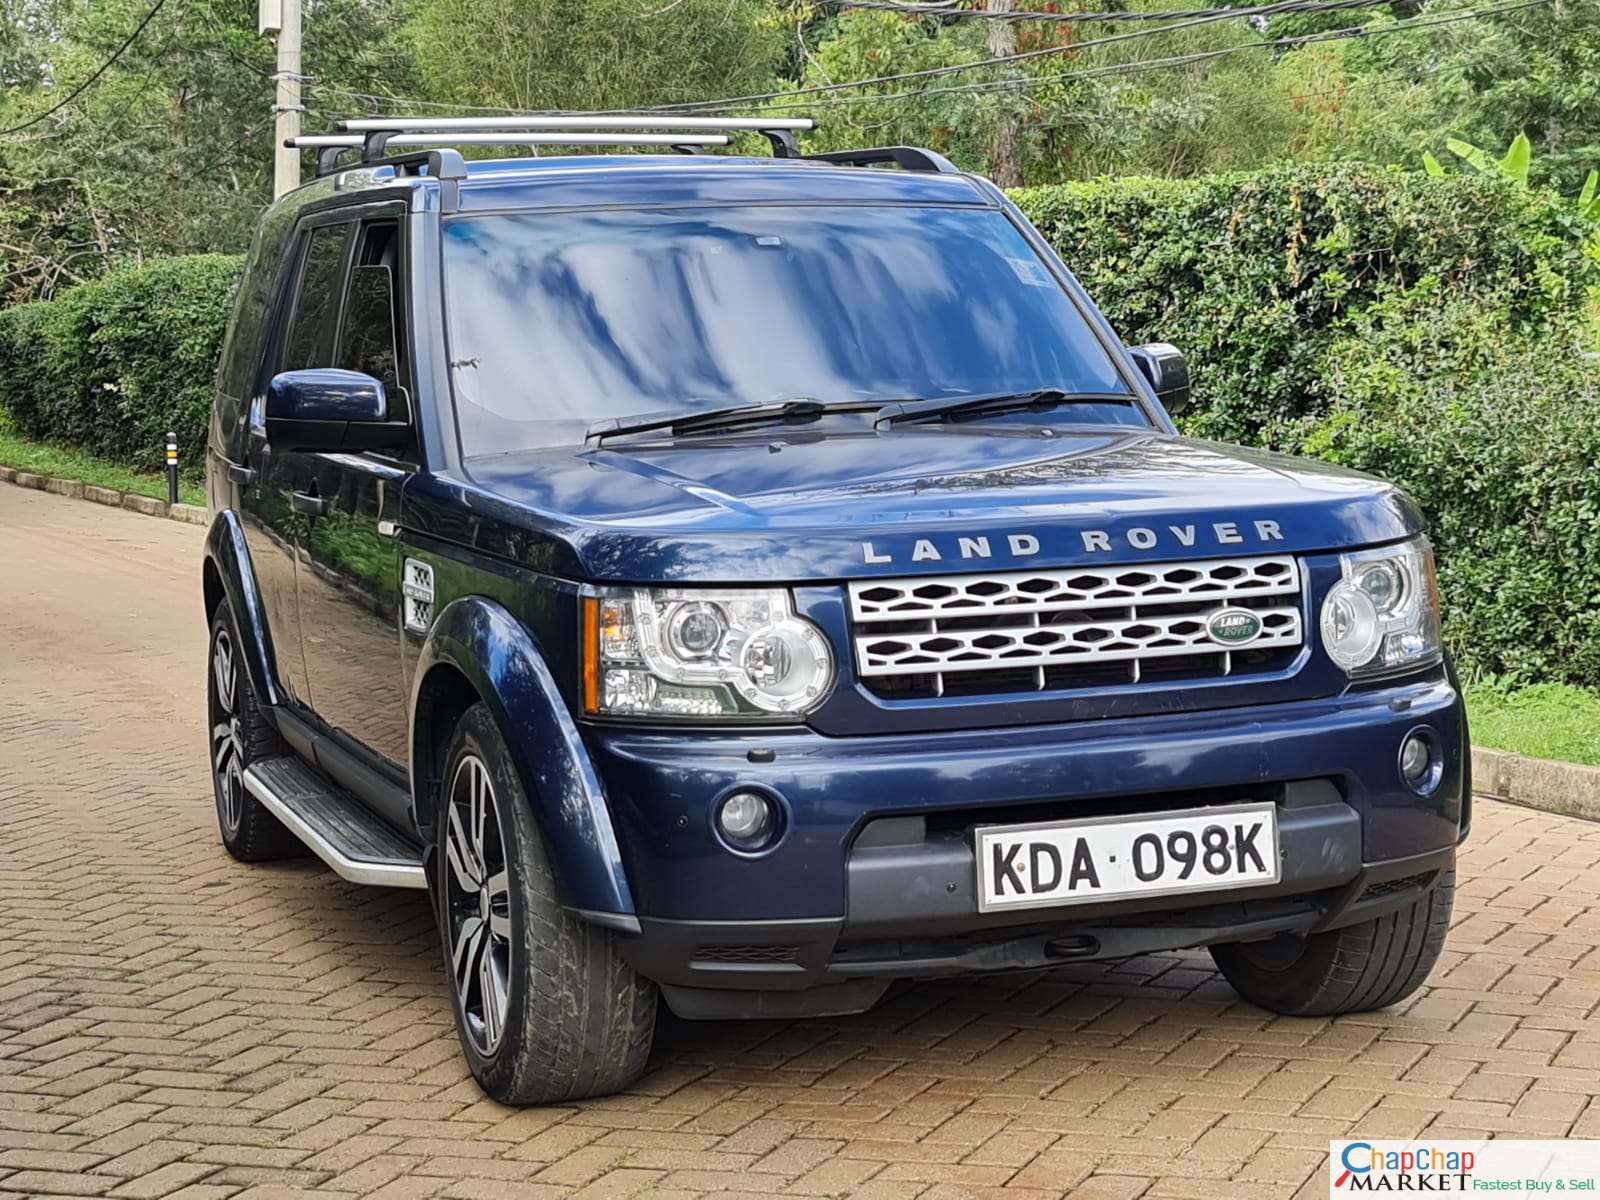 Land Rover Discovery 4 QUICK SALE Triple SUNROOF You Pay 30% Deposit Trade in Ok For sale in kenya New